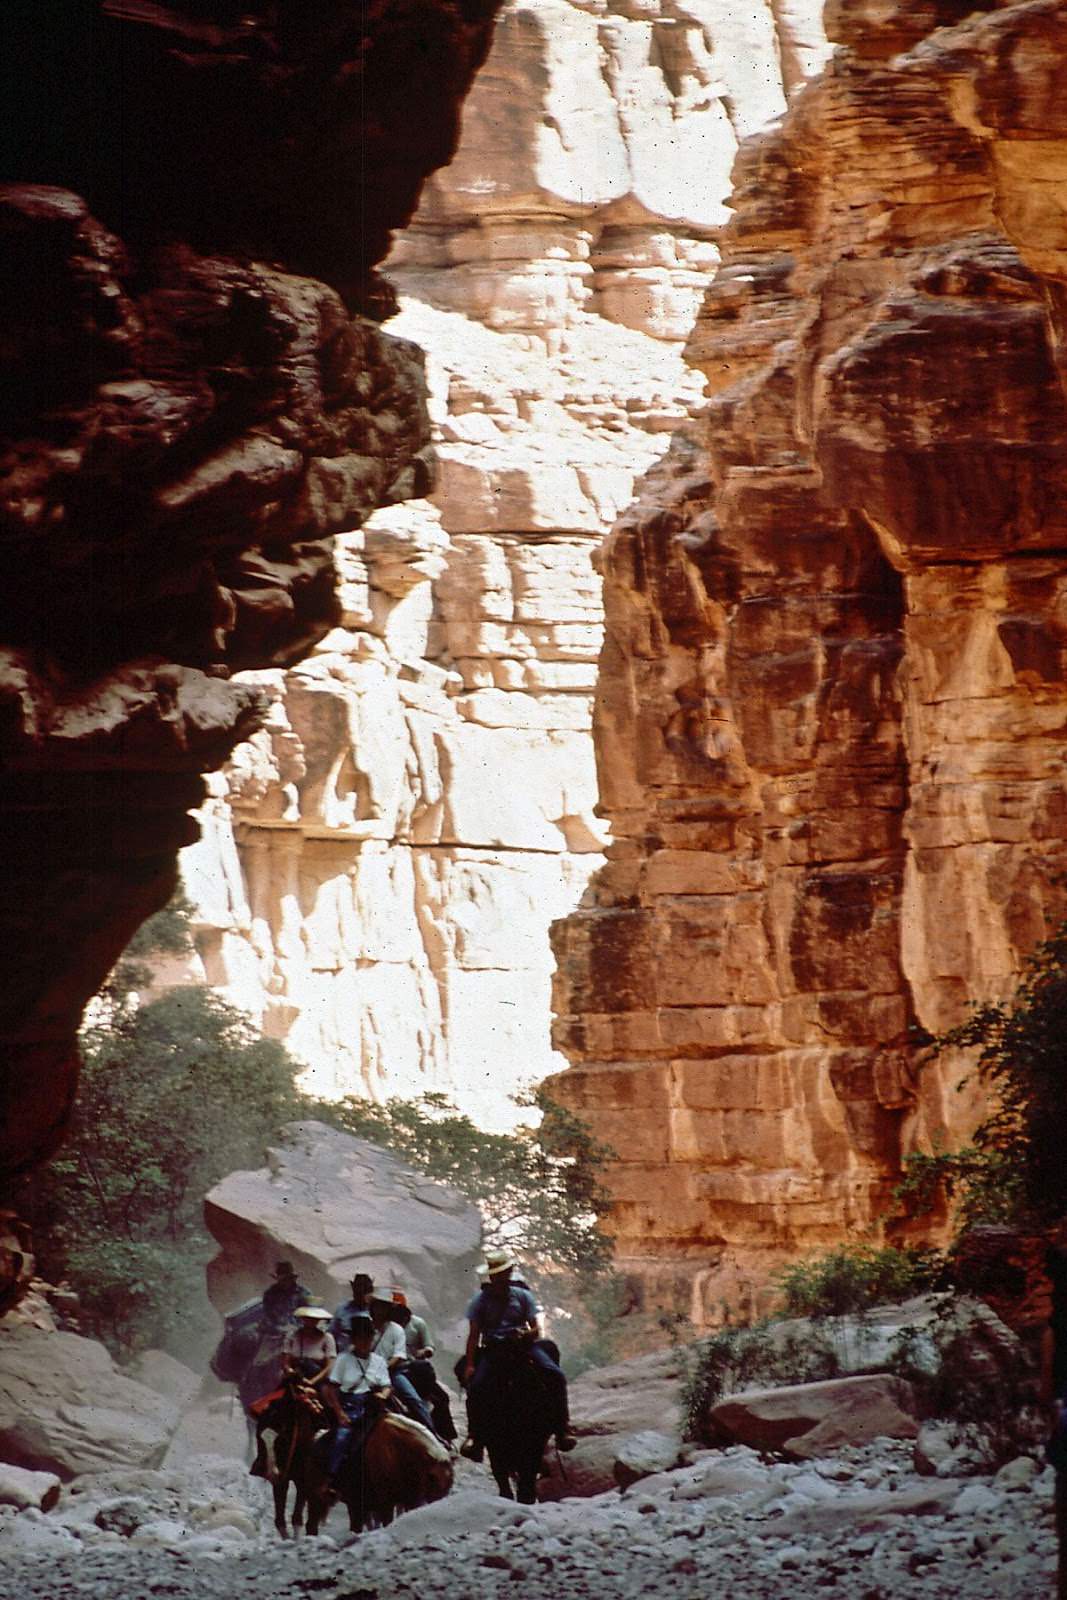 Men ride into the Grand Canyon on the way to the village of Supai, Arizona.